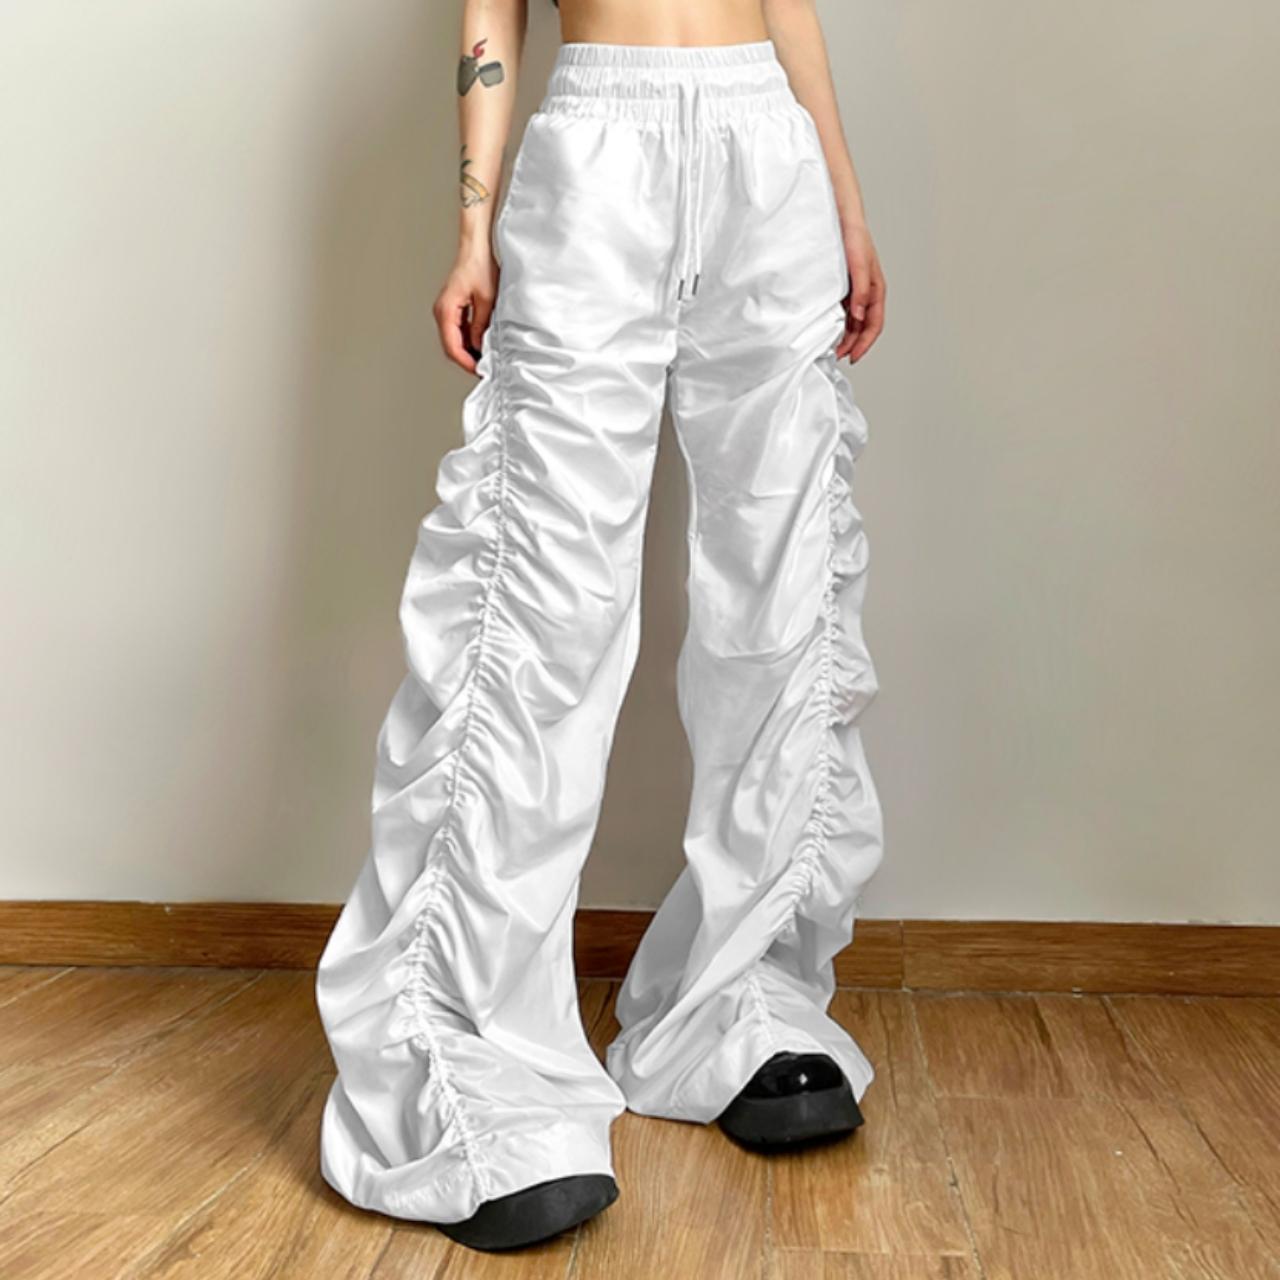 The Unbranded Brand Women's White Trousers | Depop